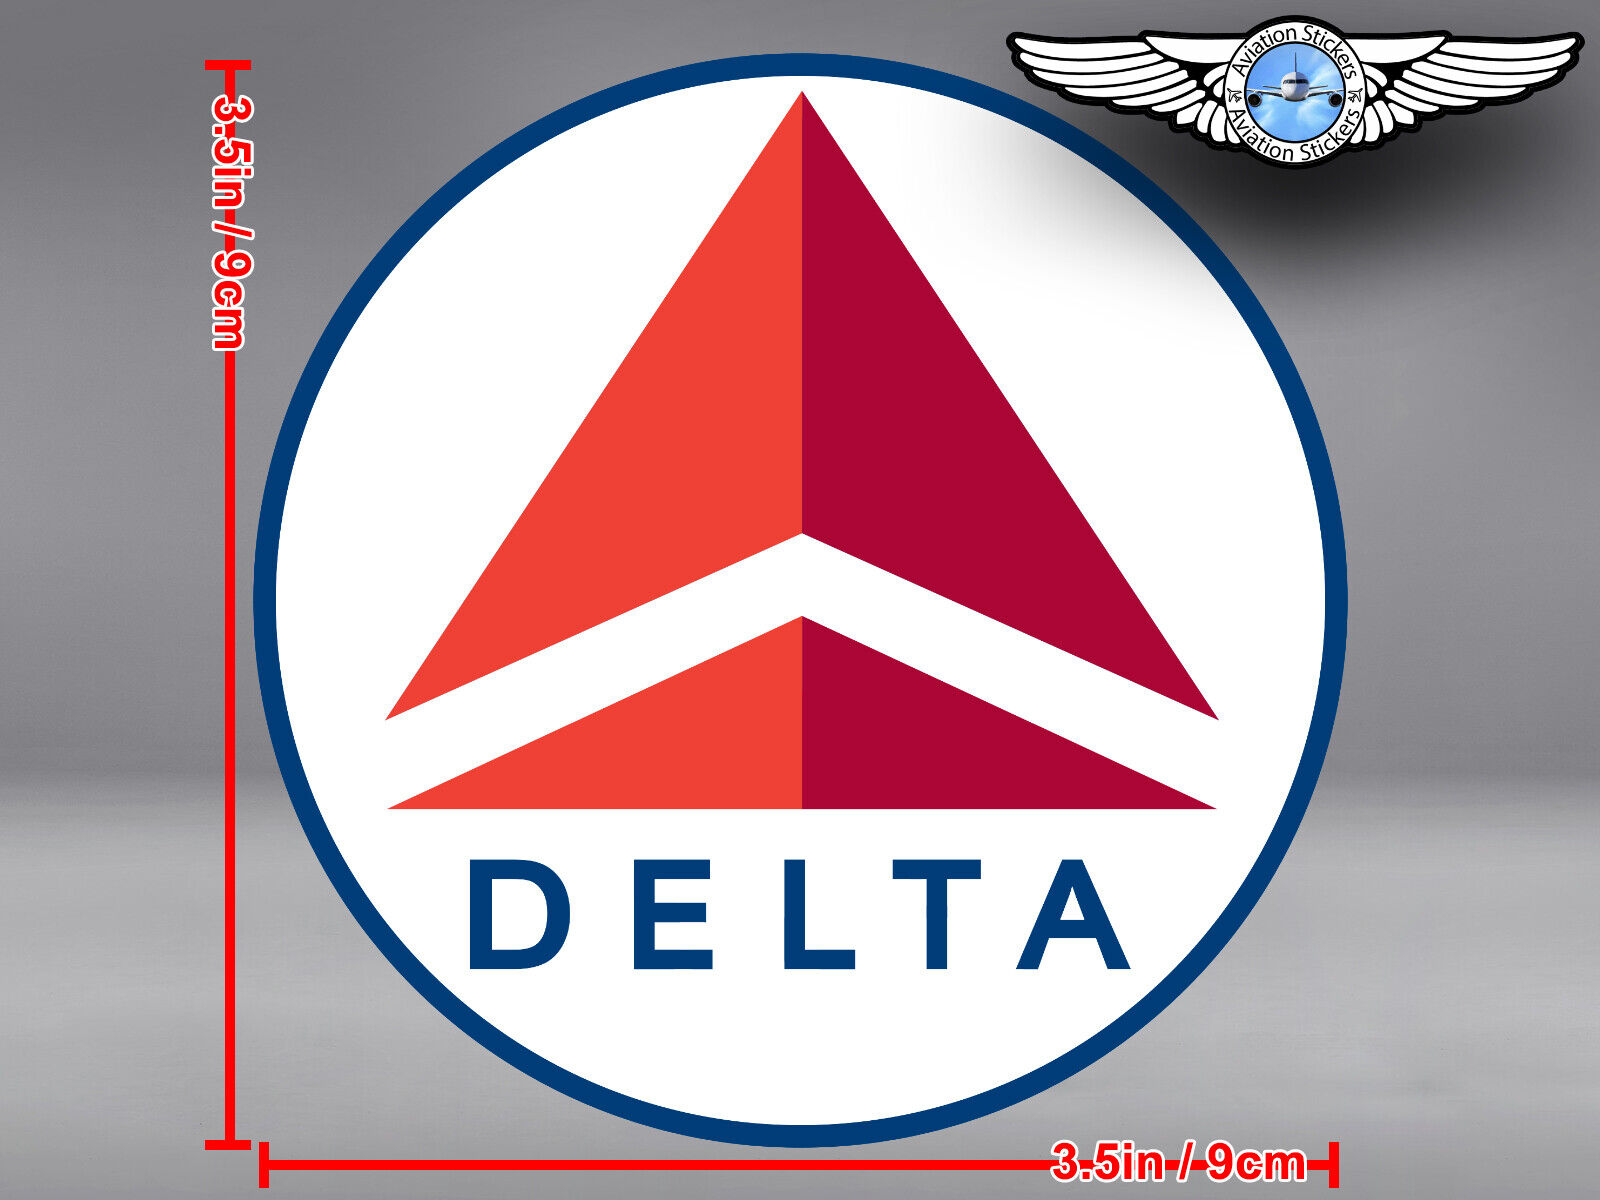 DELTA AIR LINES AIRLINES NEW ROUND LOGO DECAL / STICKER